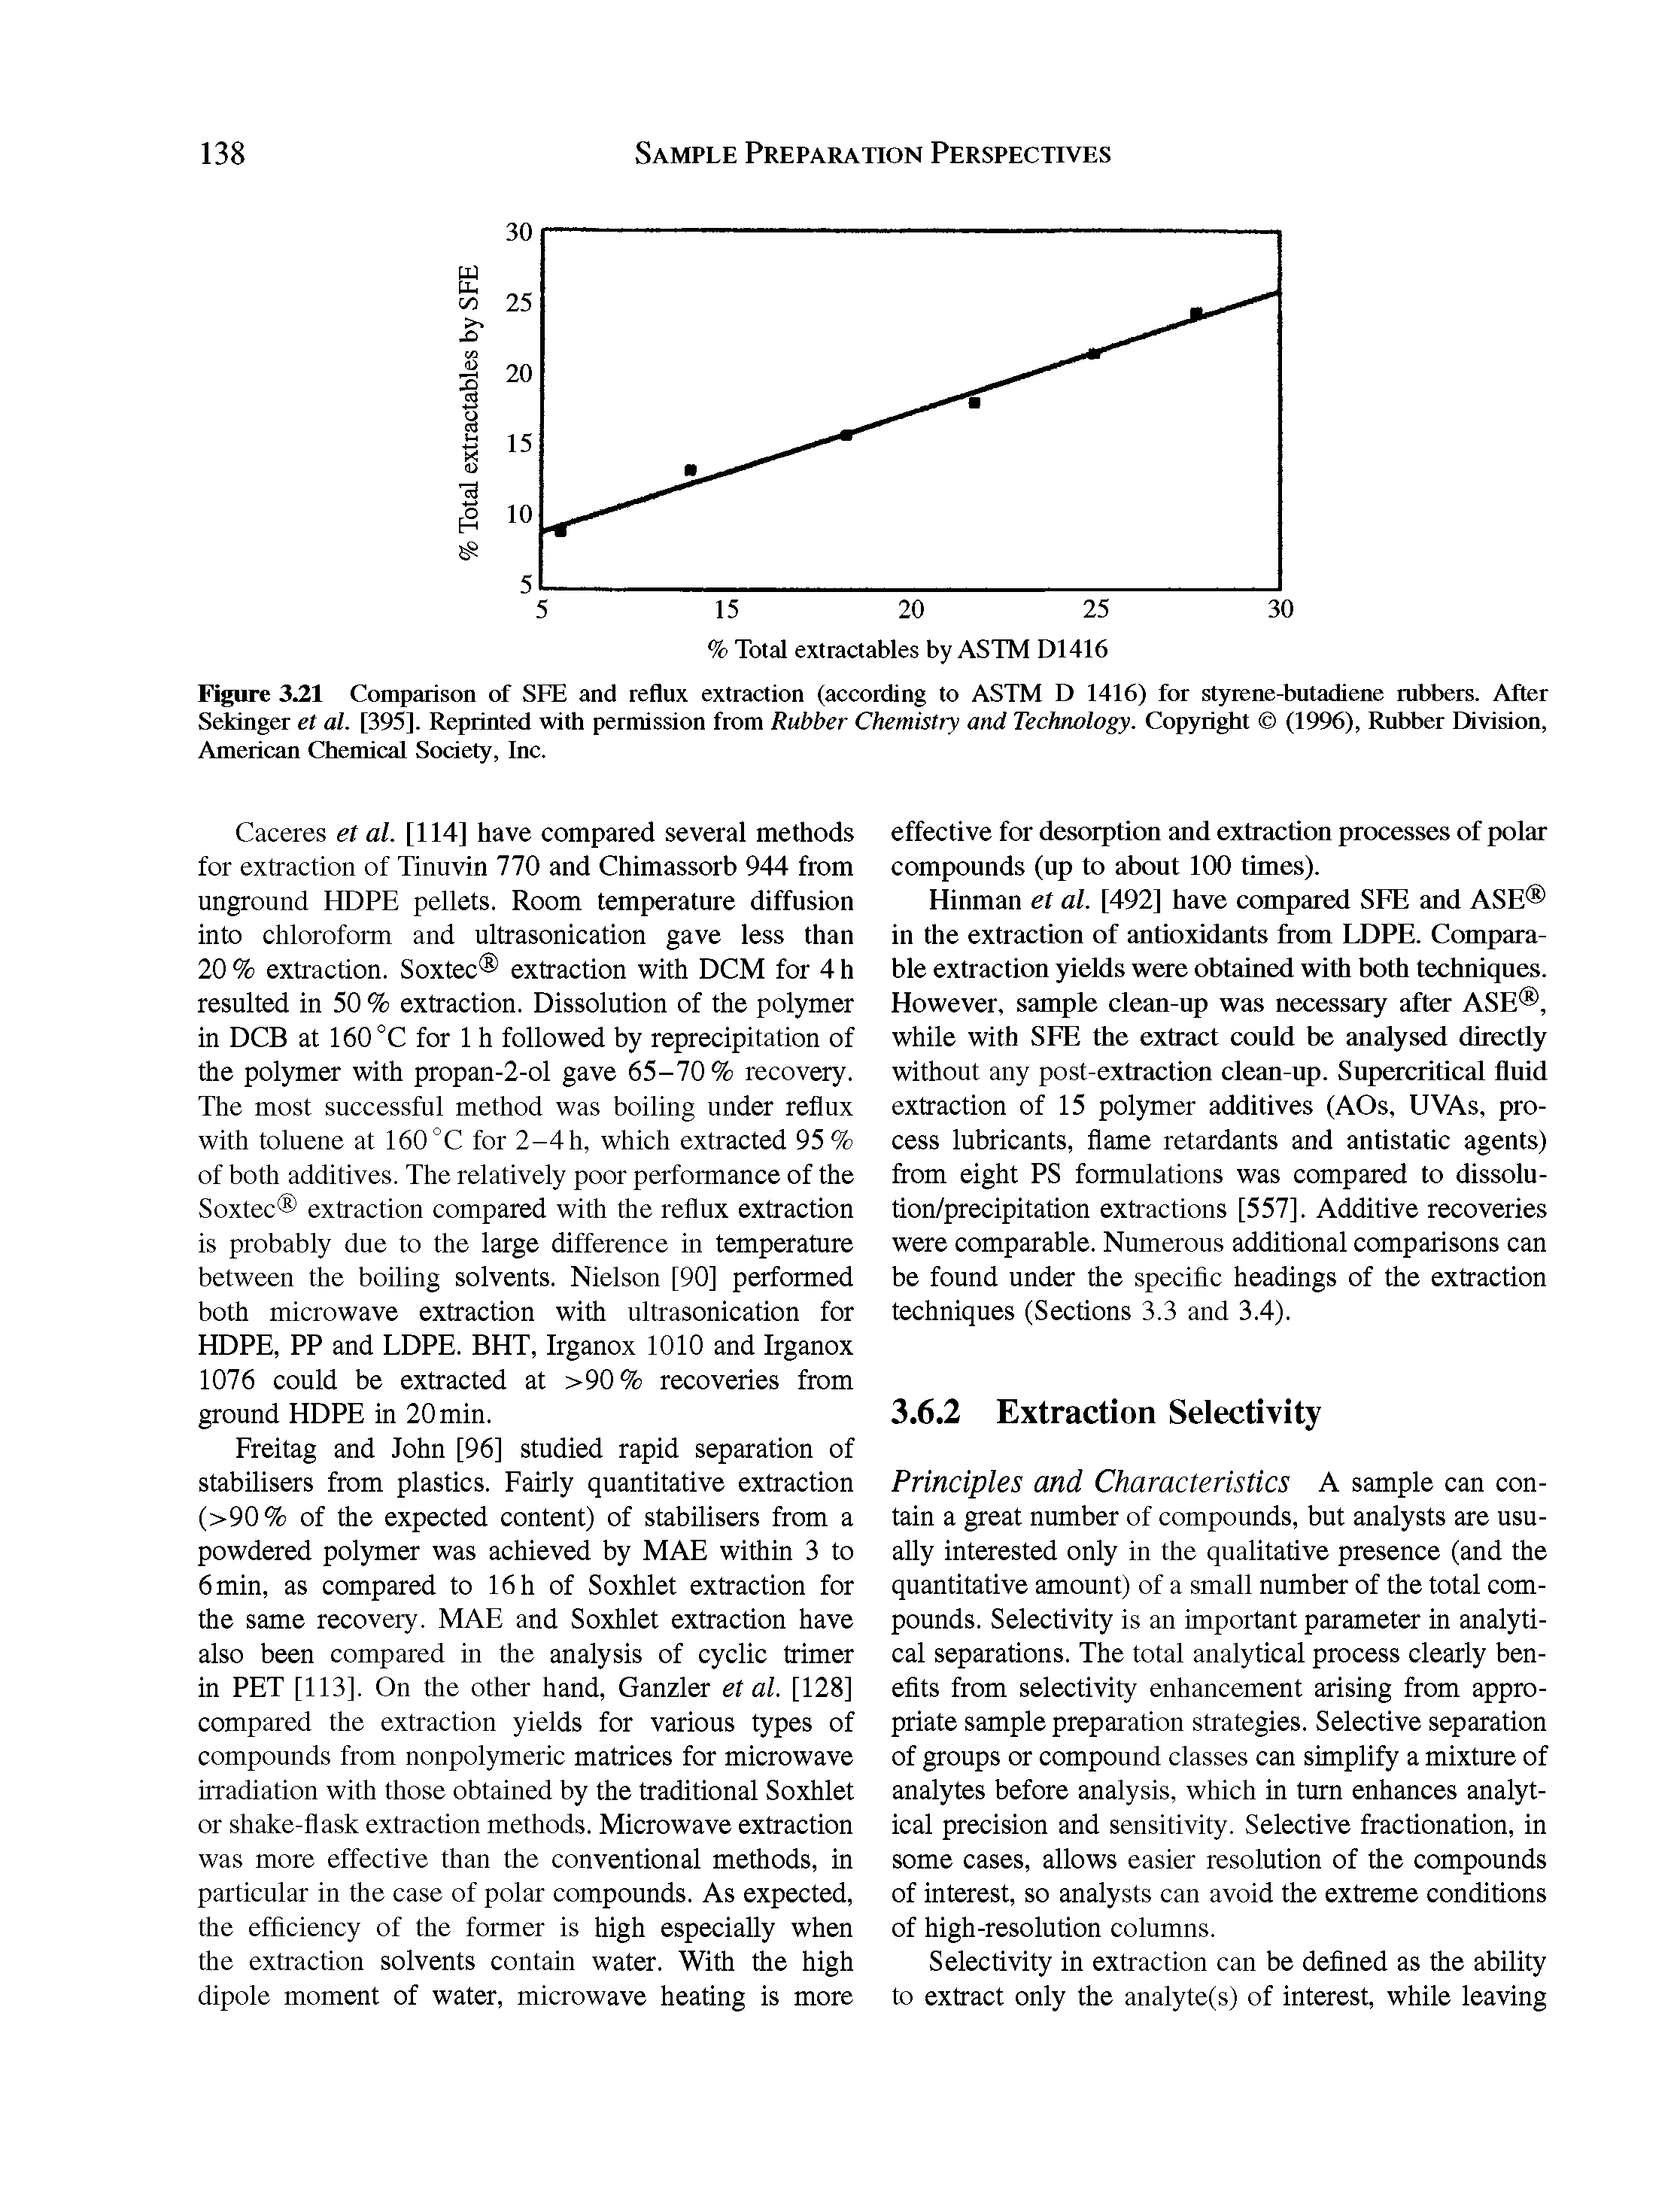 Figure 3.21 Comparison of SFE and reflux extraction (according to ASTM D 1416) for styrene-butadiene rubbers. After Sekinger et al. [395]. Reprinted with permission from Rubber Chemistry and Technology. Copyright (1996), Rubber Division, American Chemical Society, Inc.